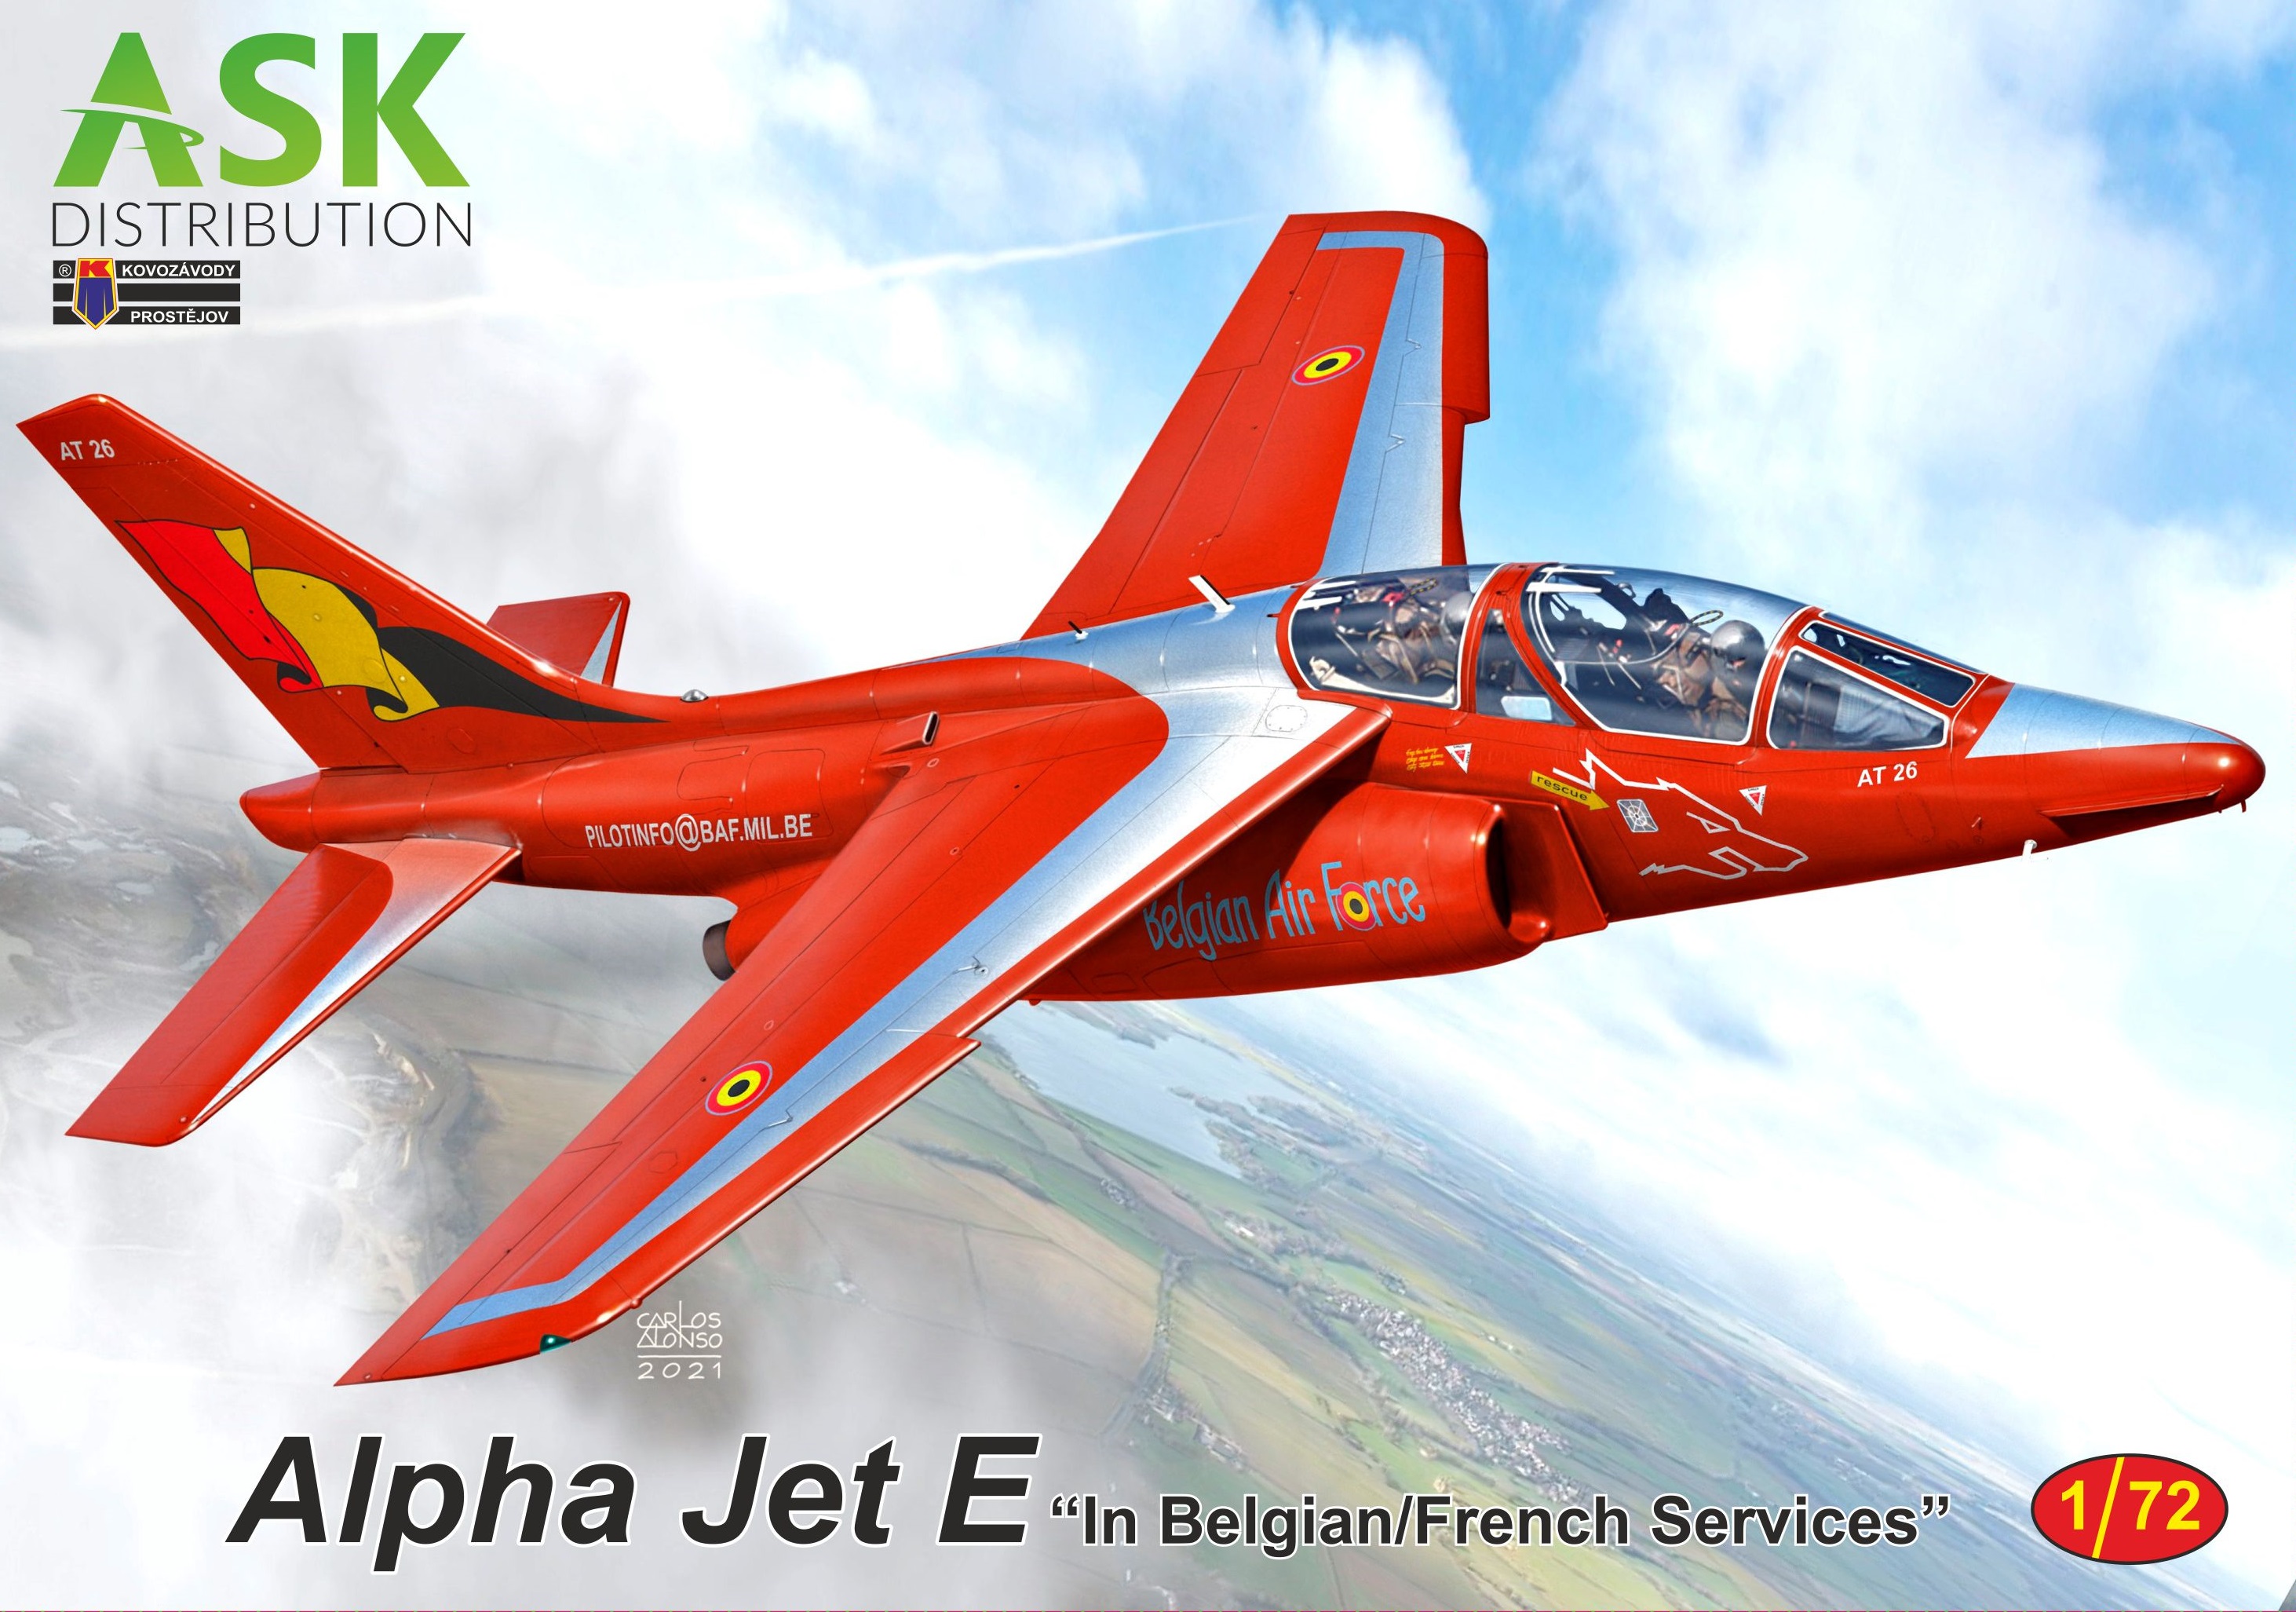 1/72 Alpha Jet E in Belgian/French Services, ASK Distribution limited edition